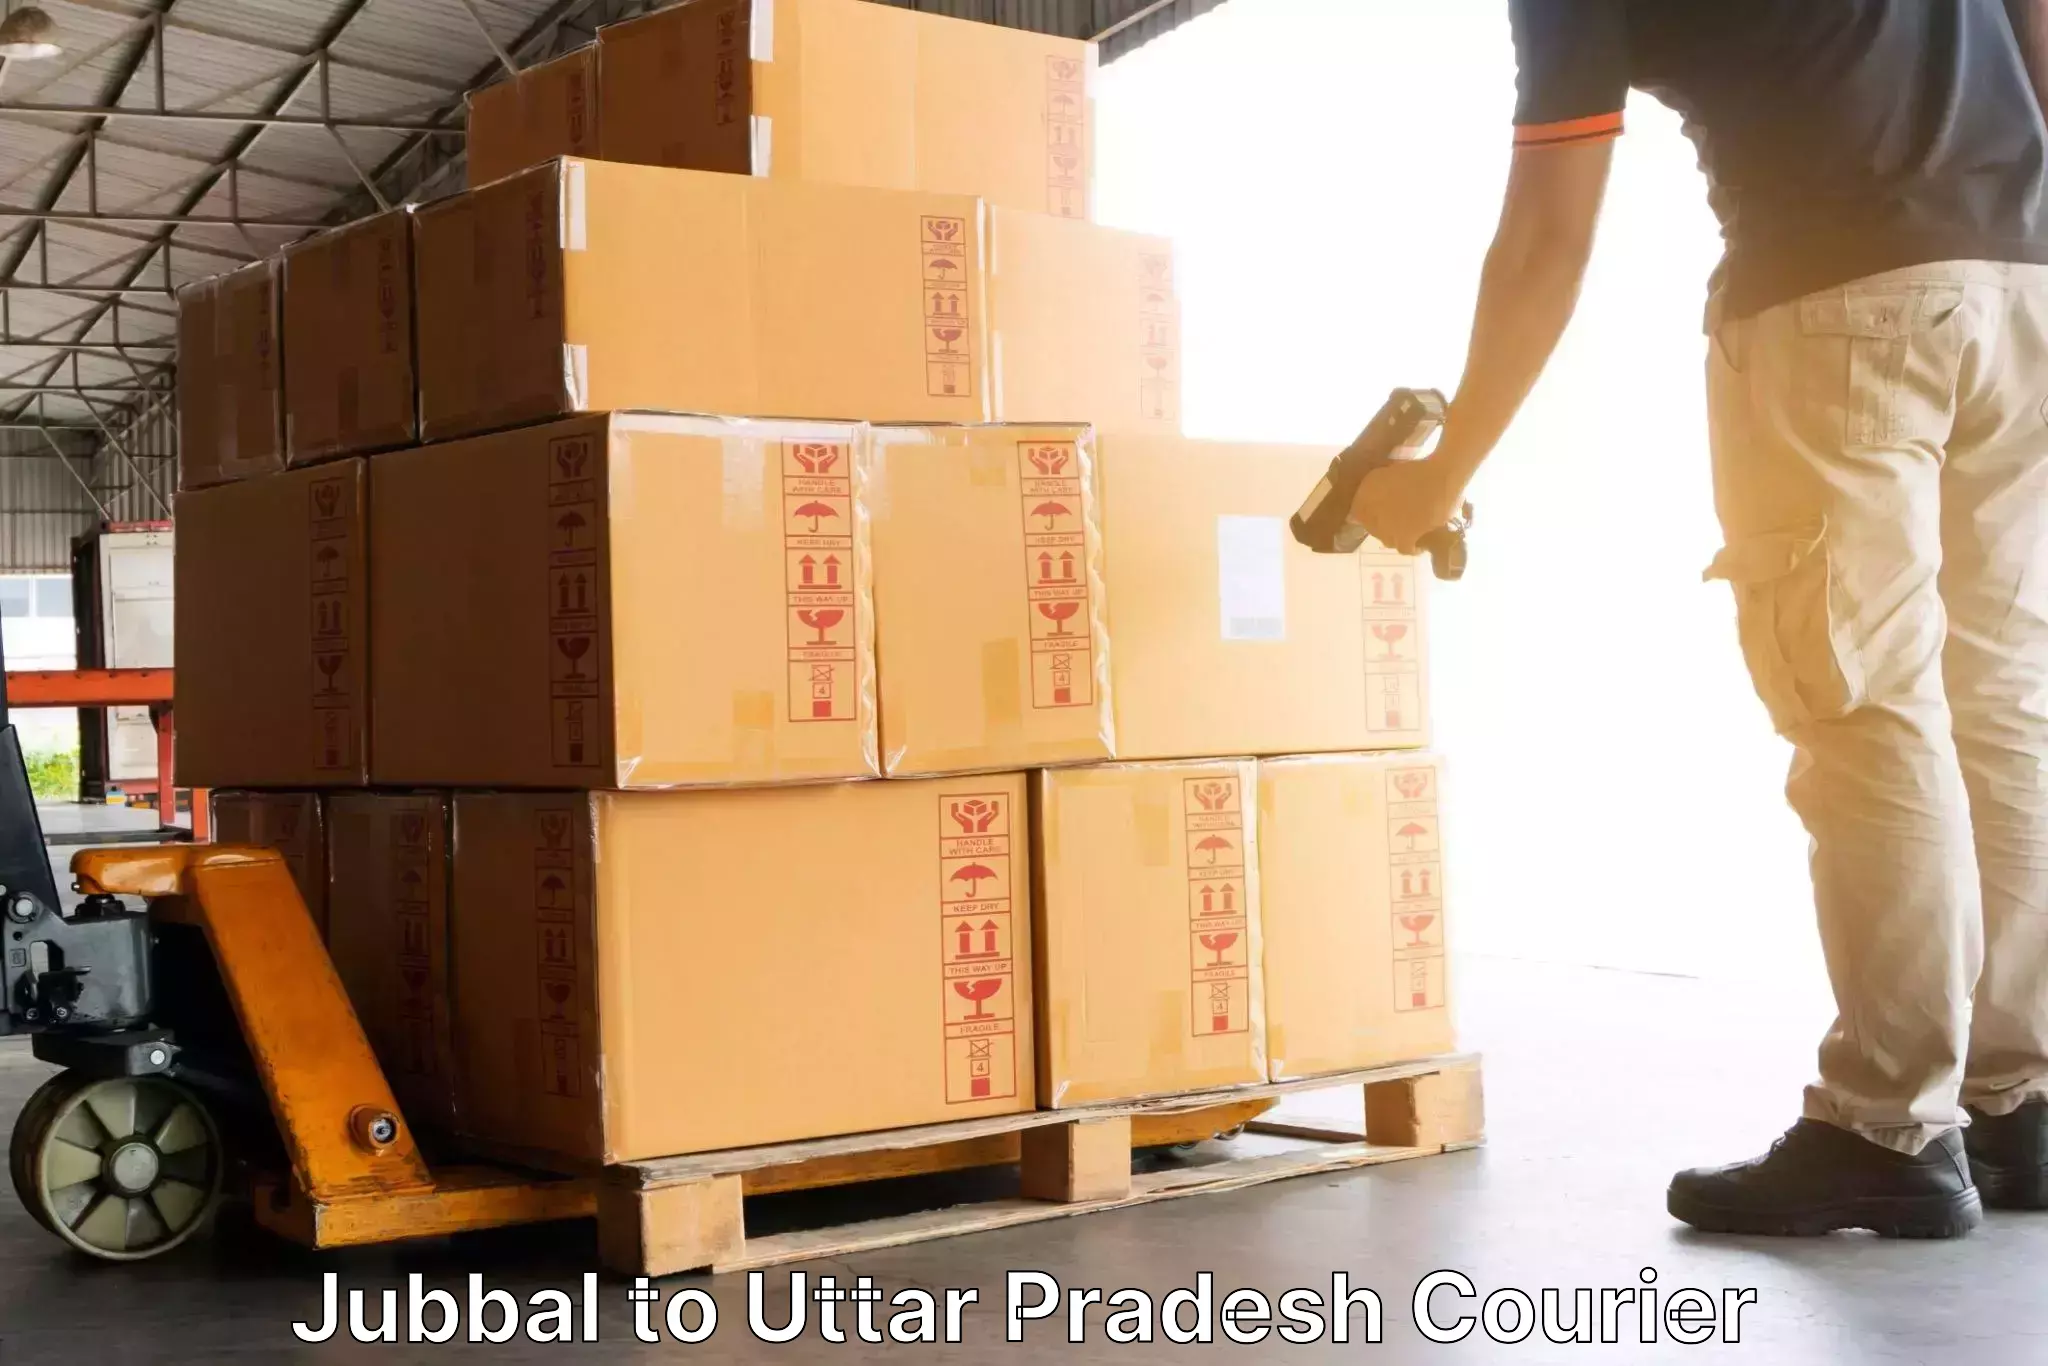 E-commerce fulfillment in Jubbal to Dullahpur